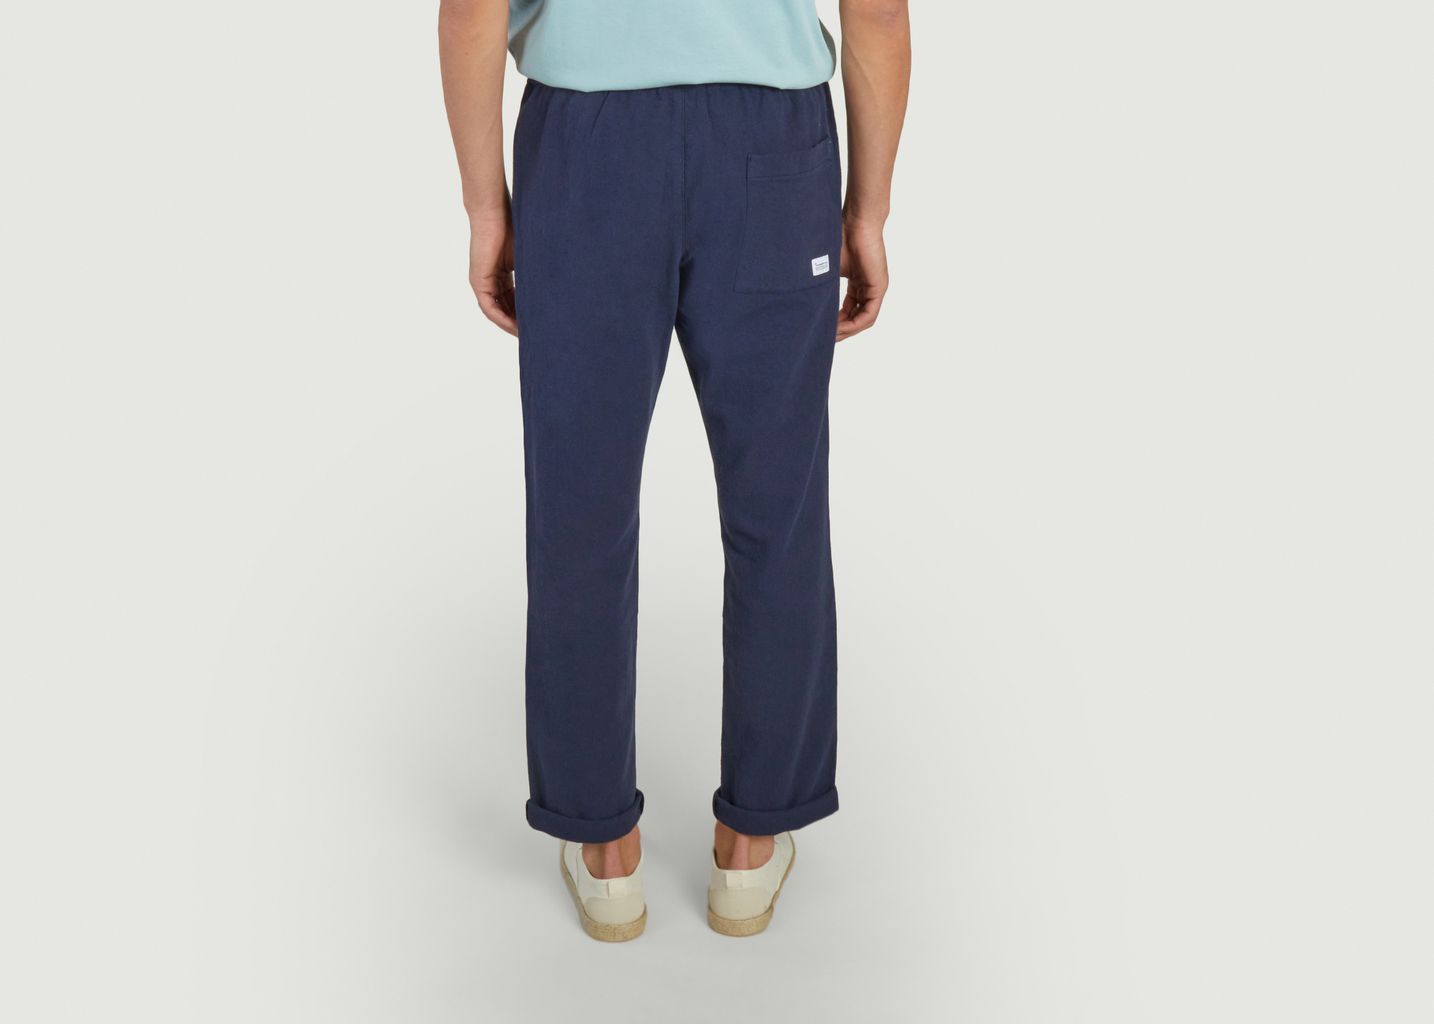 FIG loose-fitting pants in crushed cotton - KCA